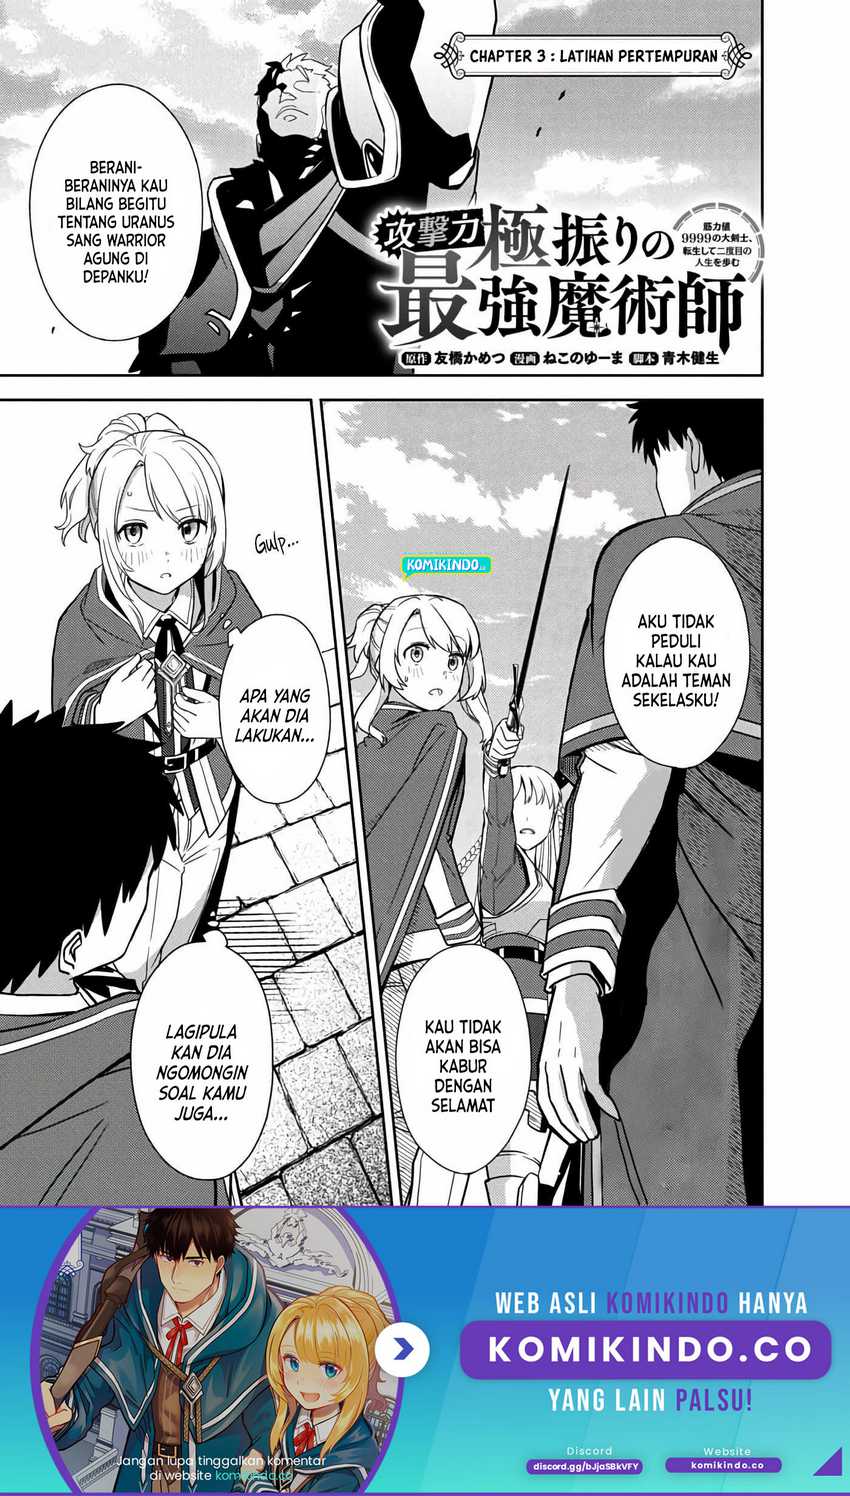 The Reincarnated Swordsman With 9999 Strength Wants To Become A Magician! Chapter 3